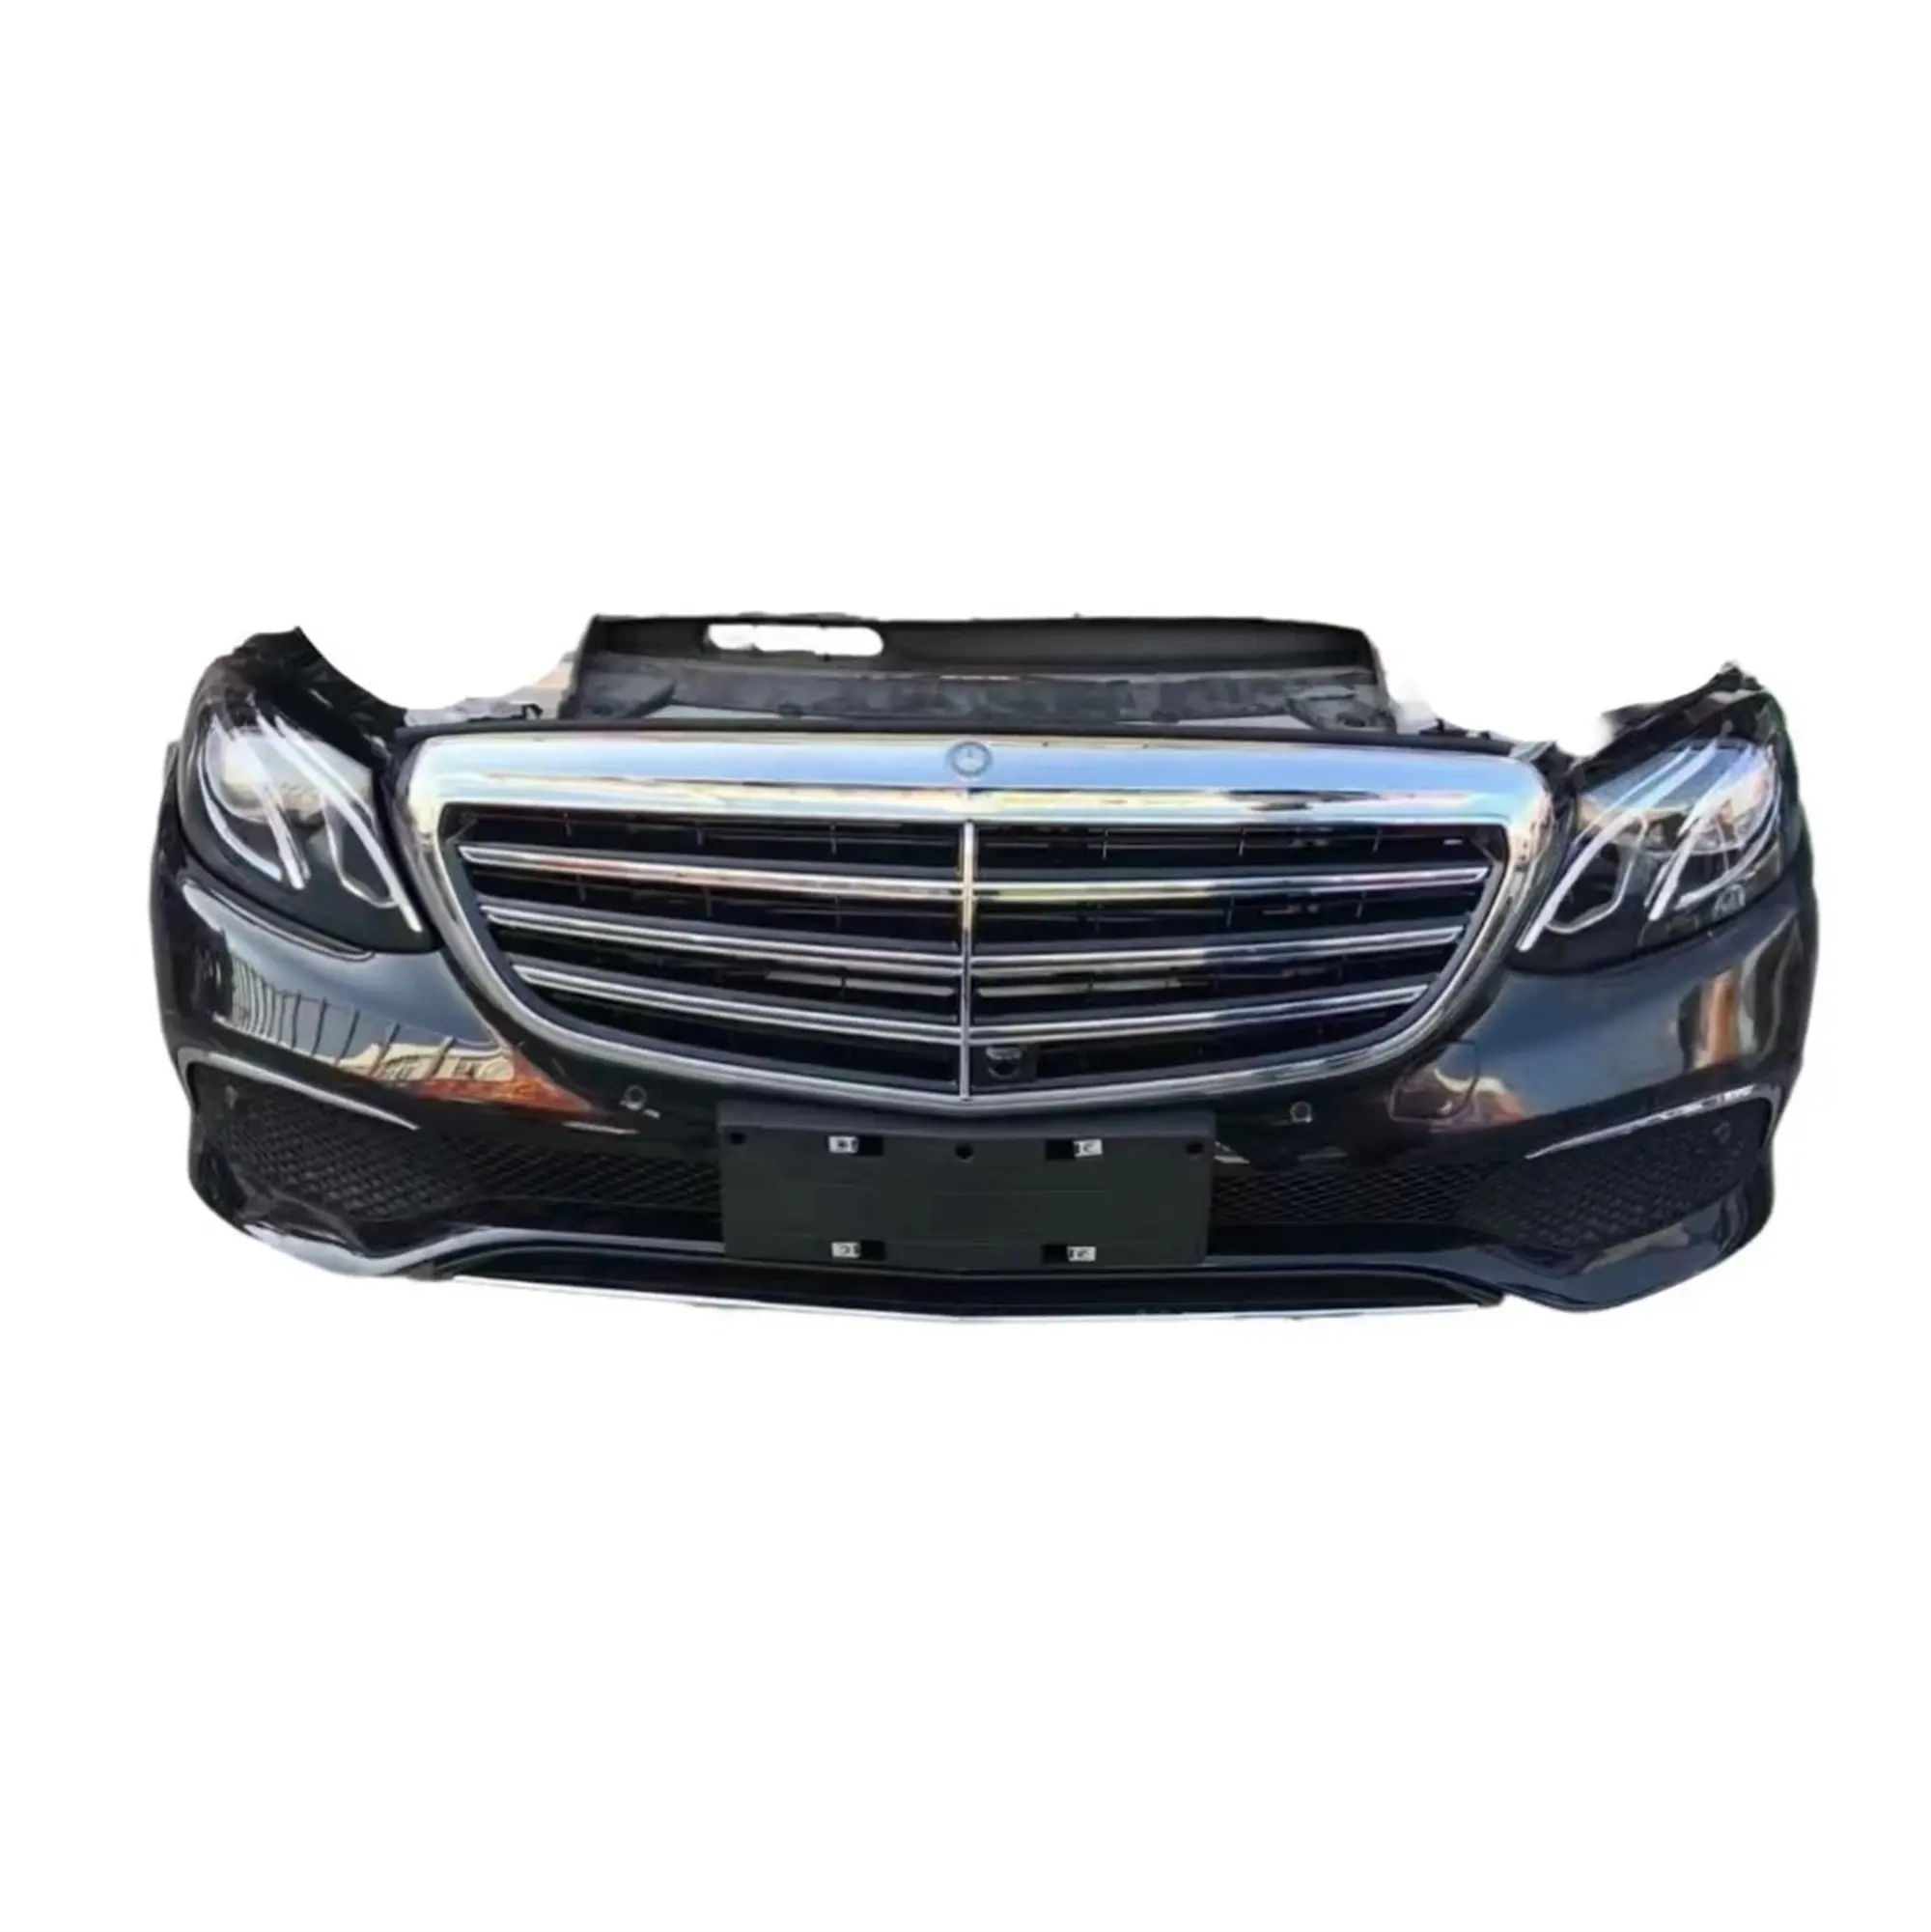 High quality front bumper suitable for Mercedes Benz E-Class W213 E43AMG E63AMG E220 E200 E350 body kit Fender grille Front bump